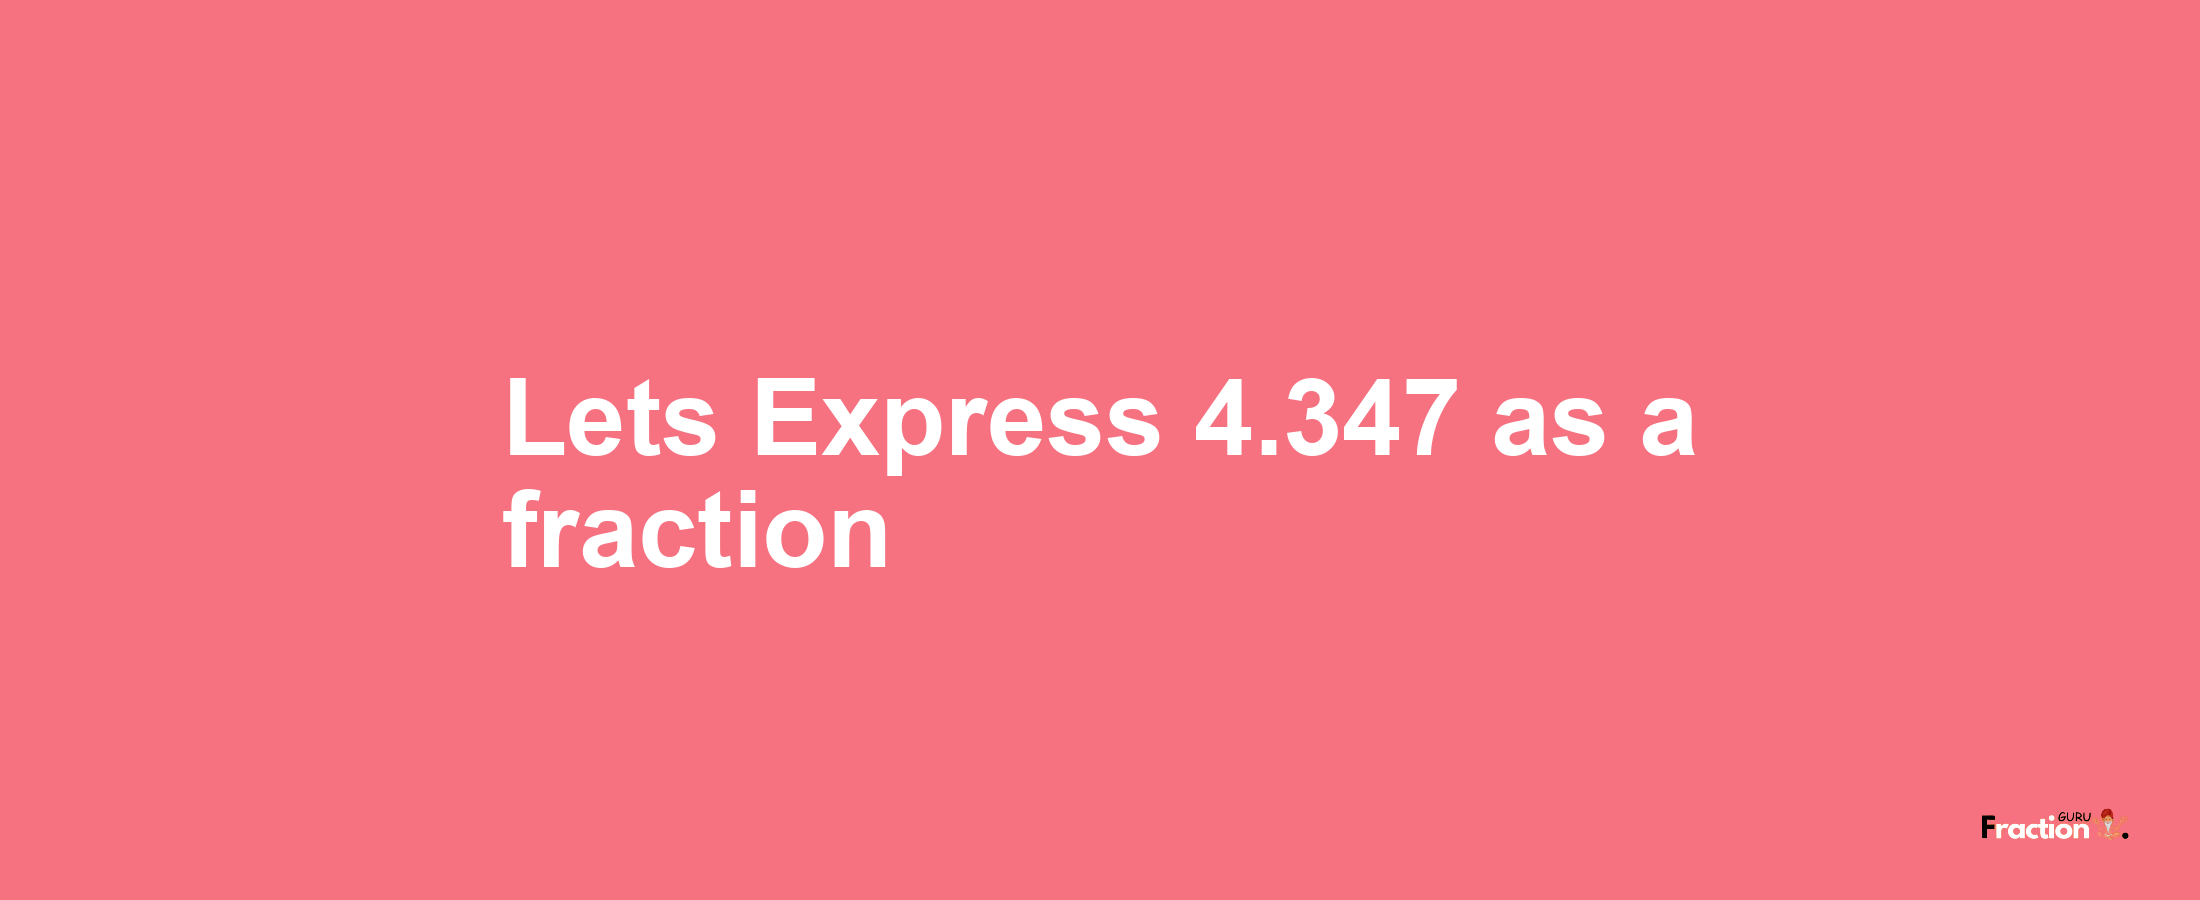 Lets Express 4.347 as afraction